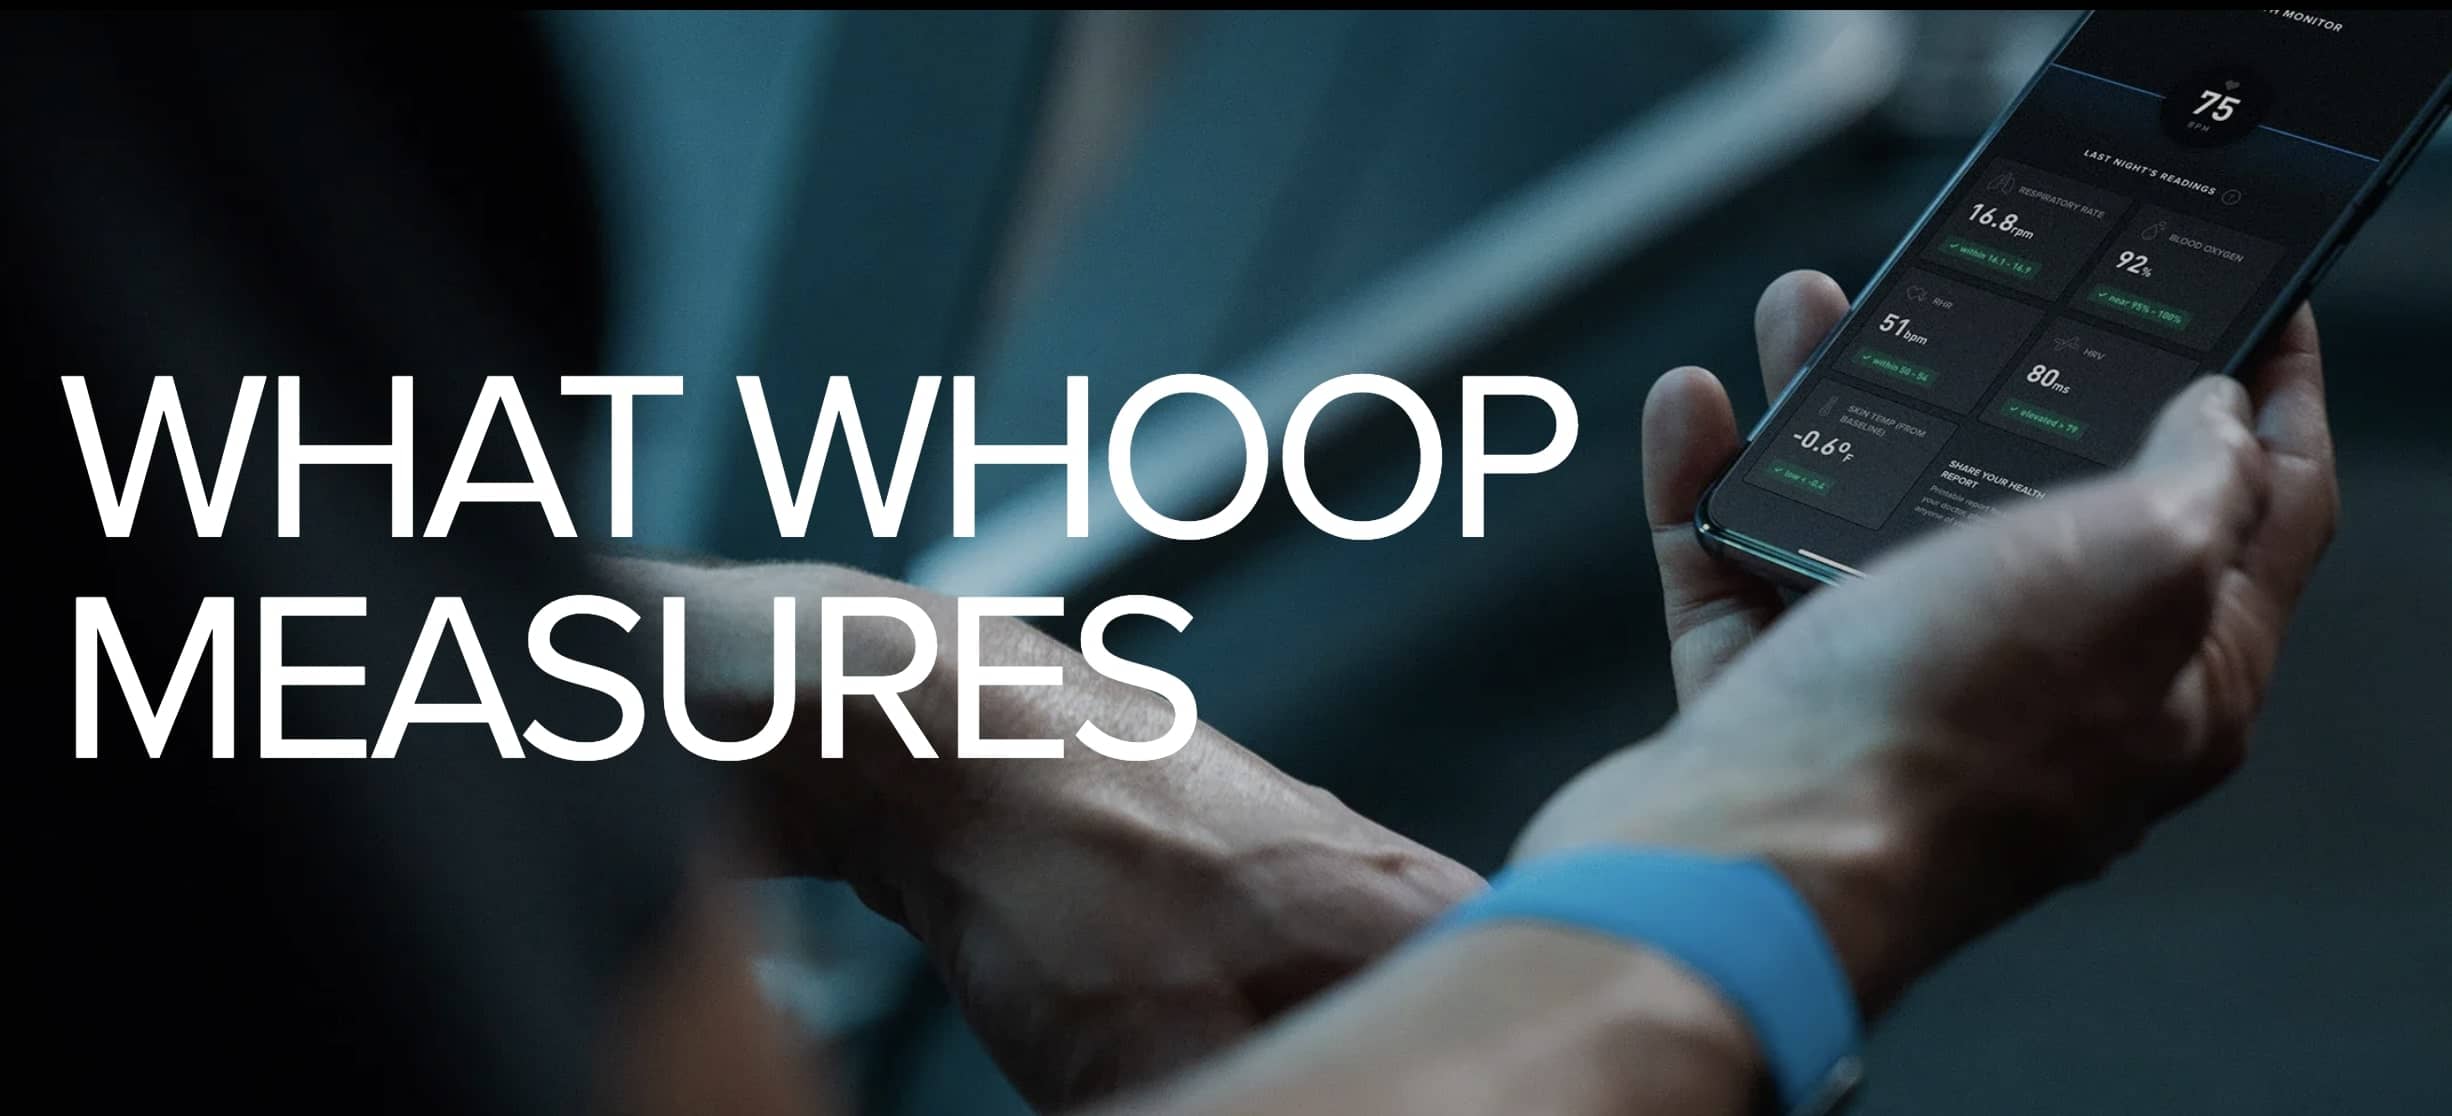 A person holding a smartphone displaying health metrics from one of the Top Fitness Tech Companies, with text "WHAT WHOOP MEASURES" next to the screen.